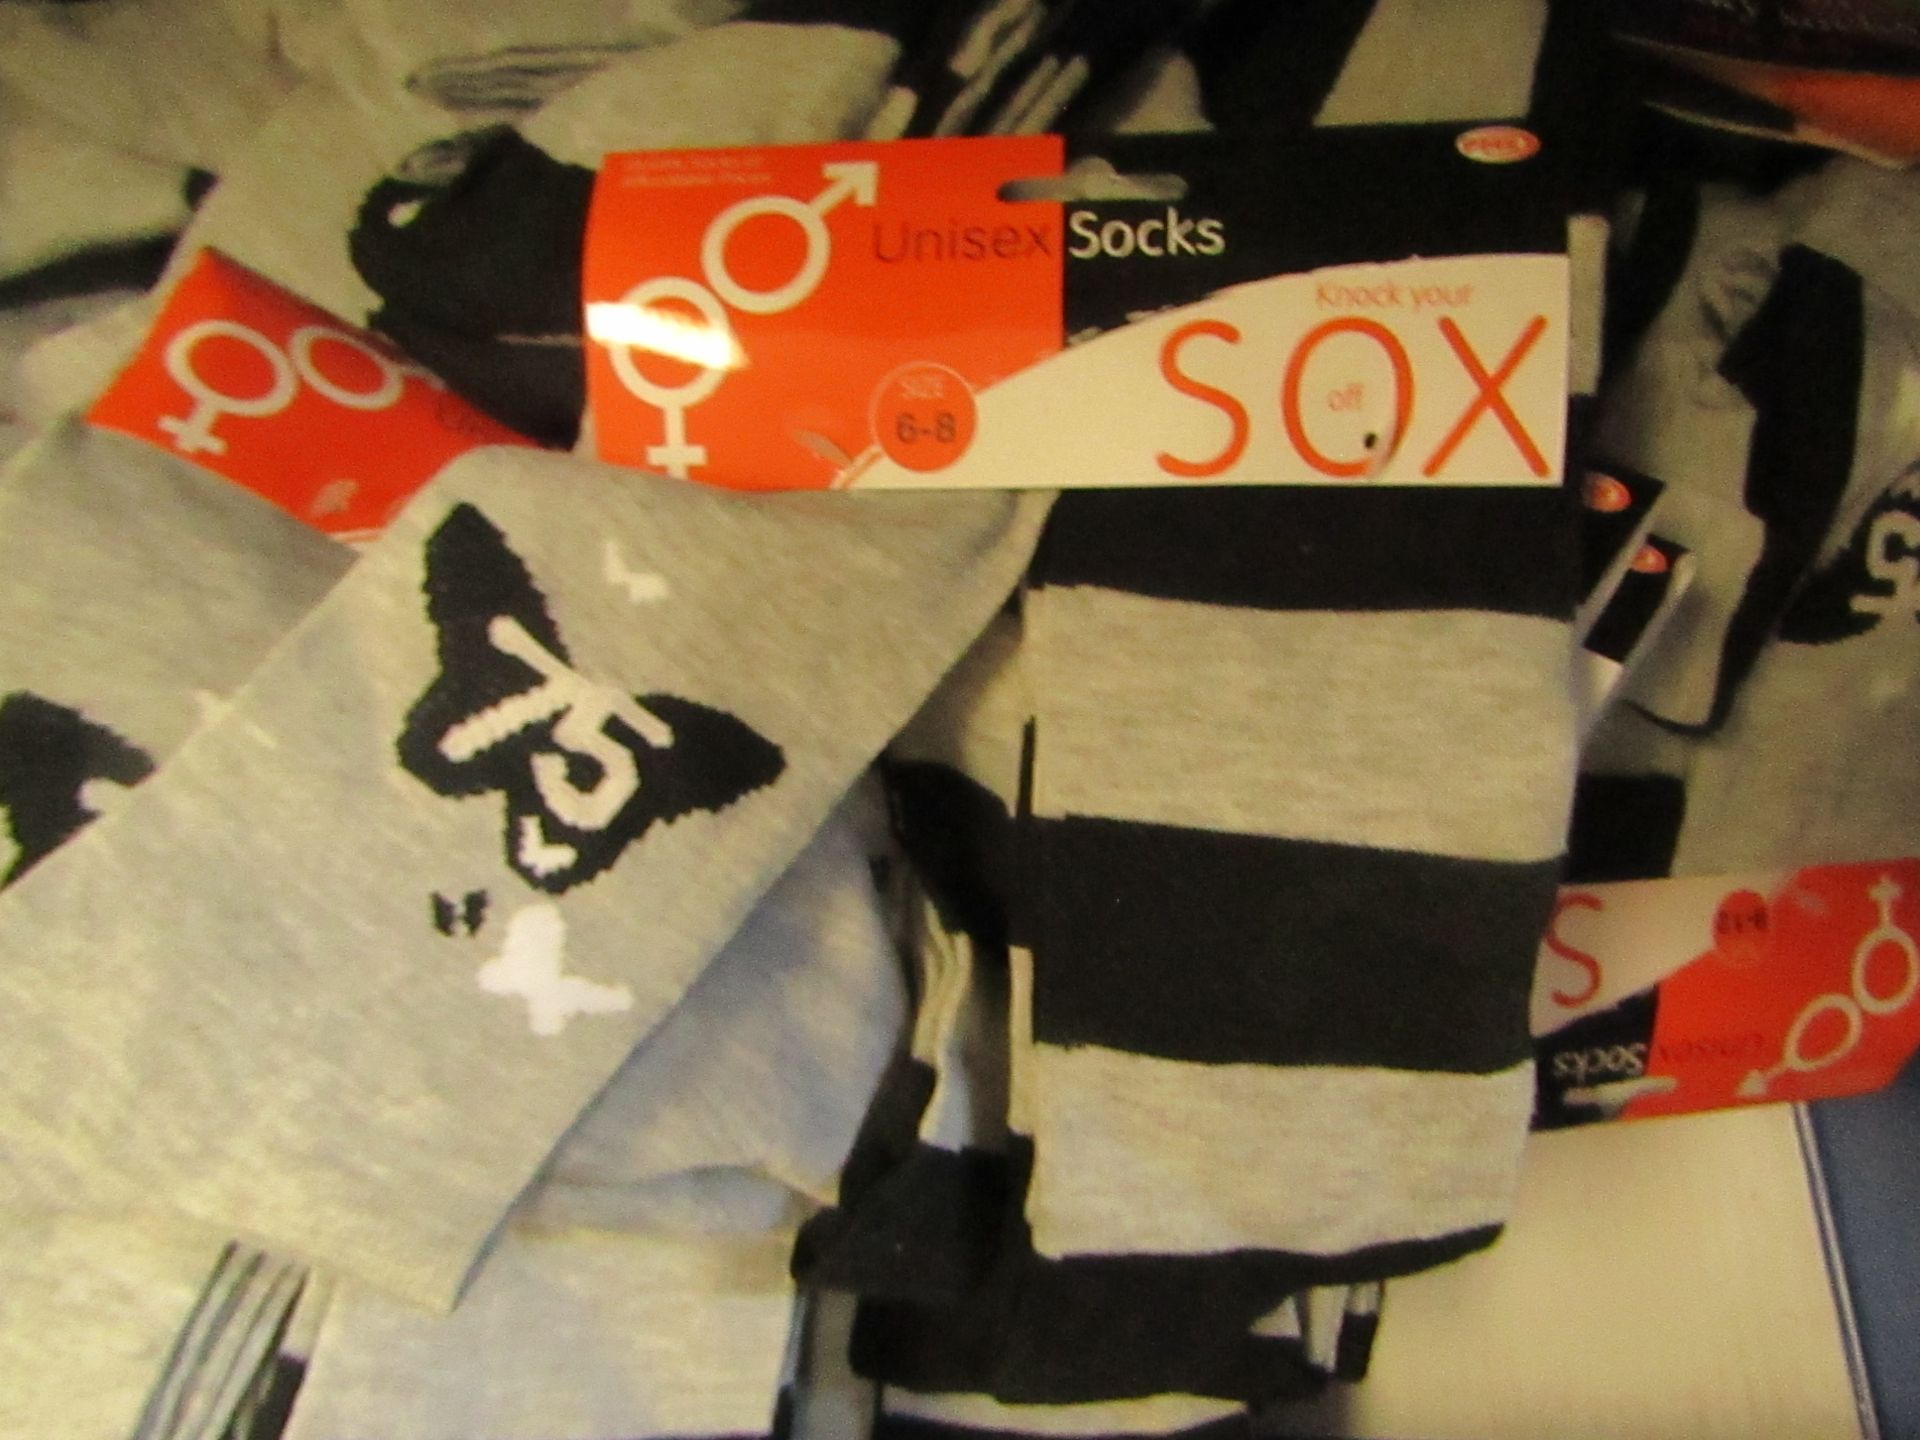 24 X Pairs of Unisex Socks Adult Size 6-8 All New & Packaged